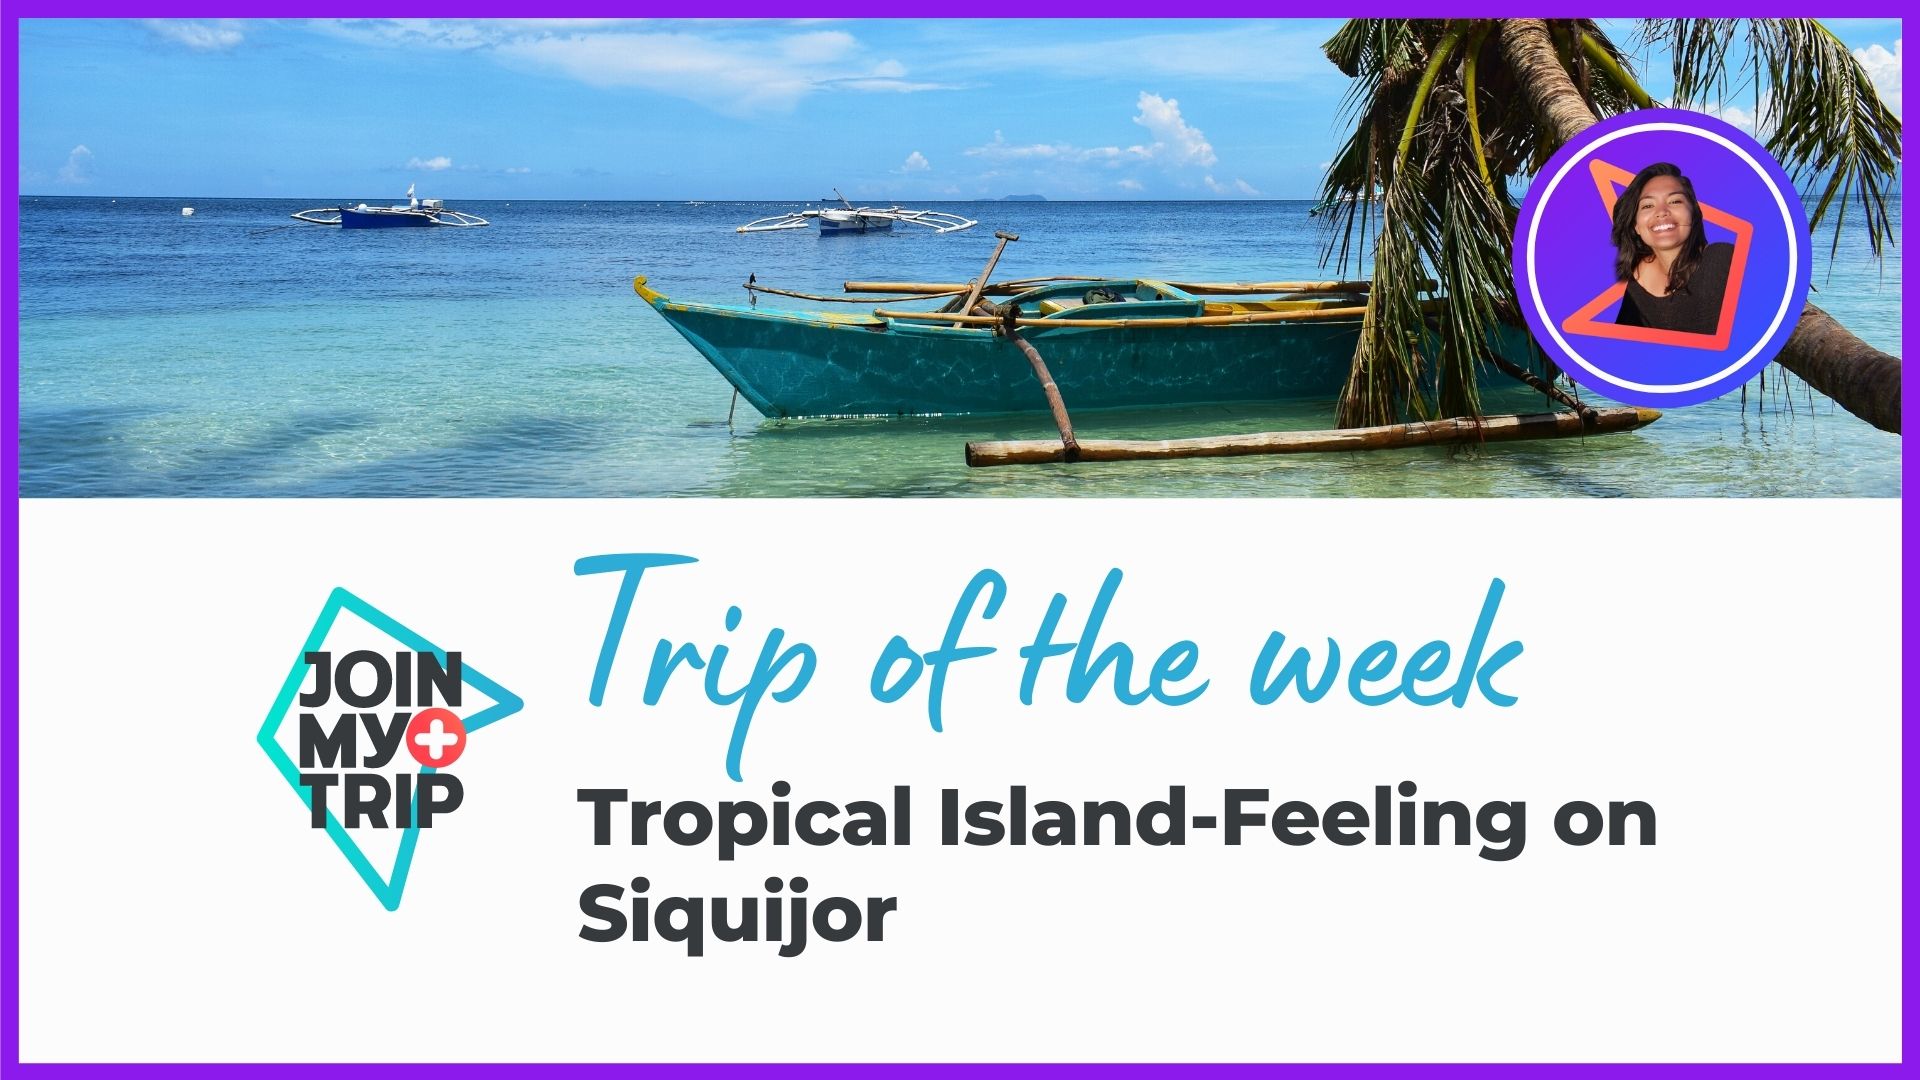 Tropical Island-Feeling on Siquijor | Trip of the Week